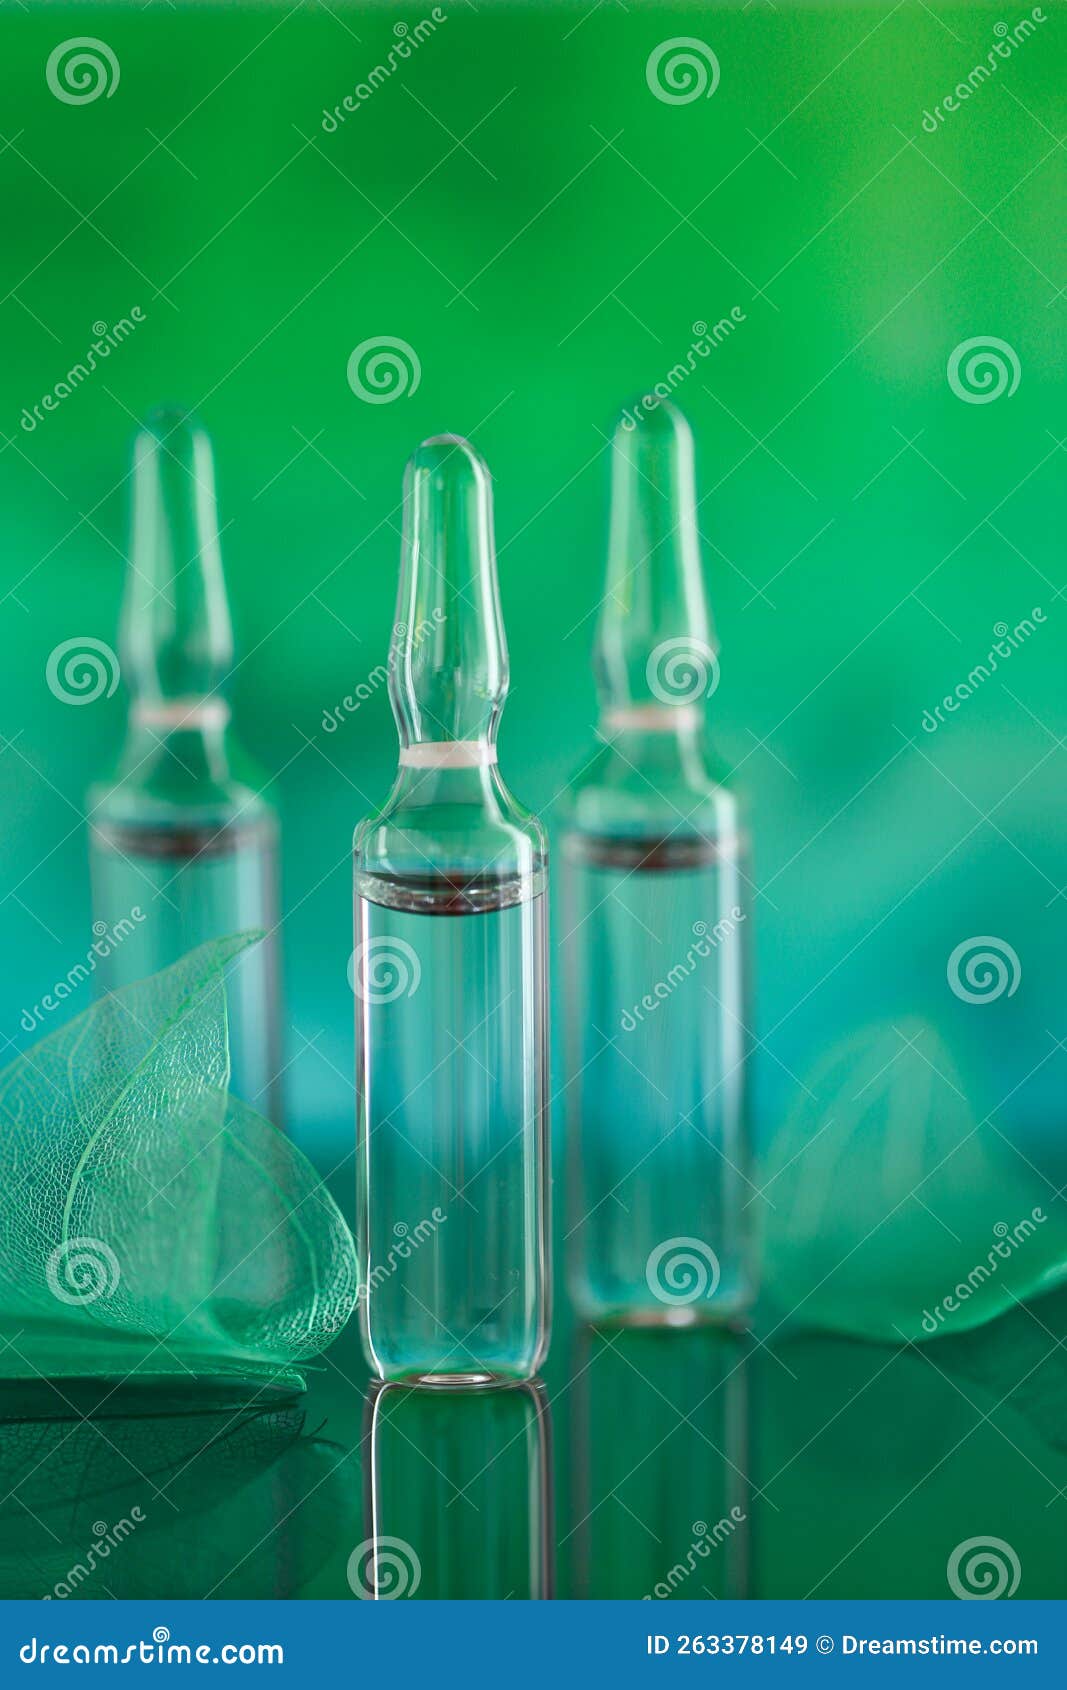 mesotherapy and dermabrasion serum in ampoules. cosmetic ampoules.beauty product.transparent ampoules and green